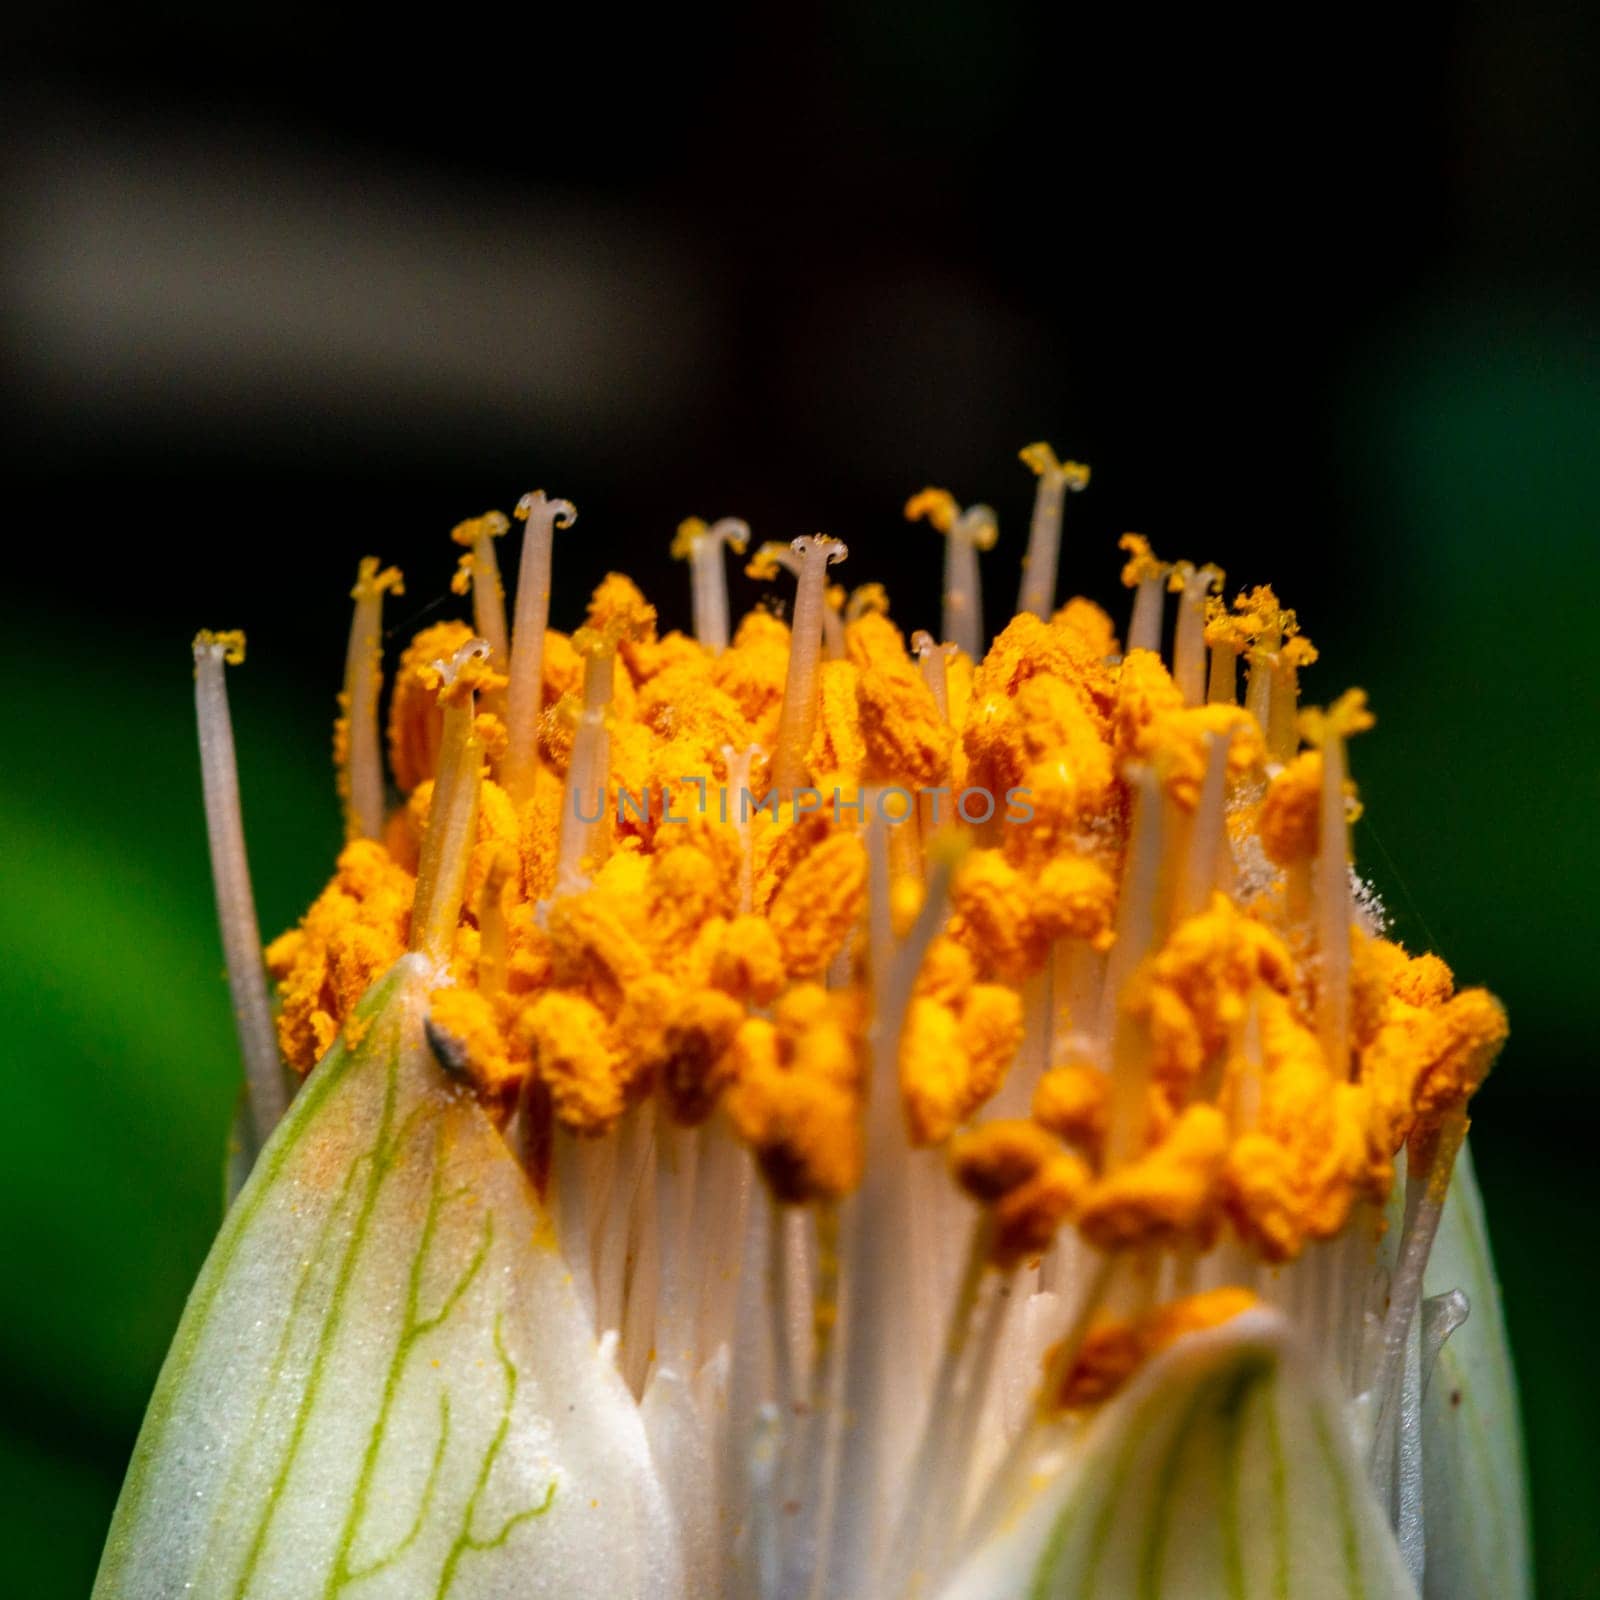 Haemanthus albiflos - flower bud with bright yellow stamens by Hydrobiolog